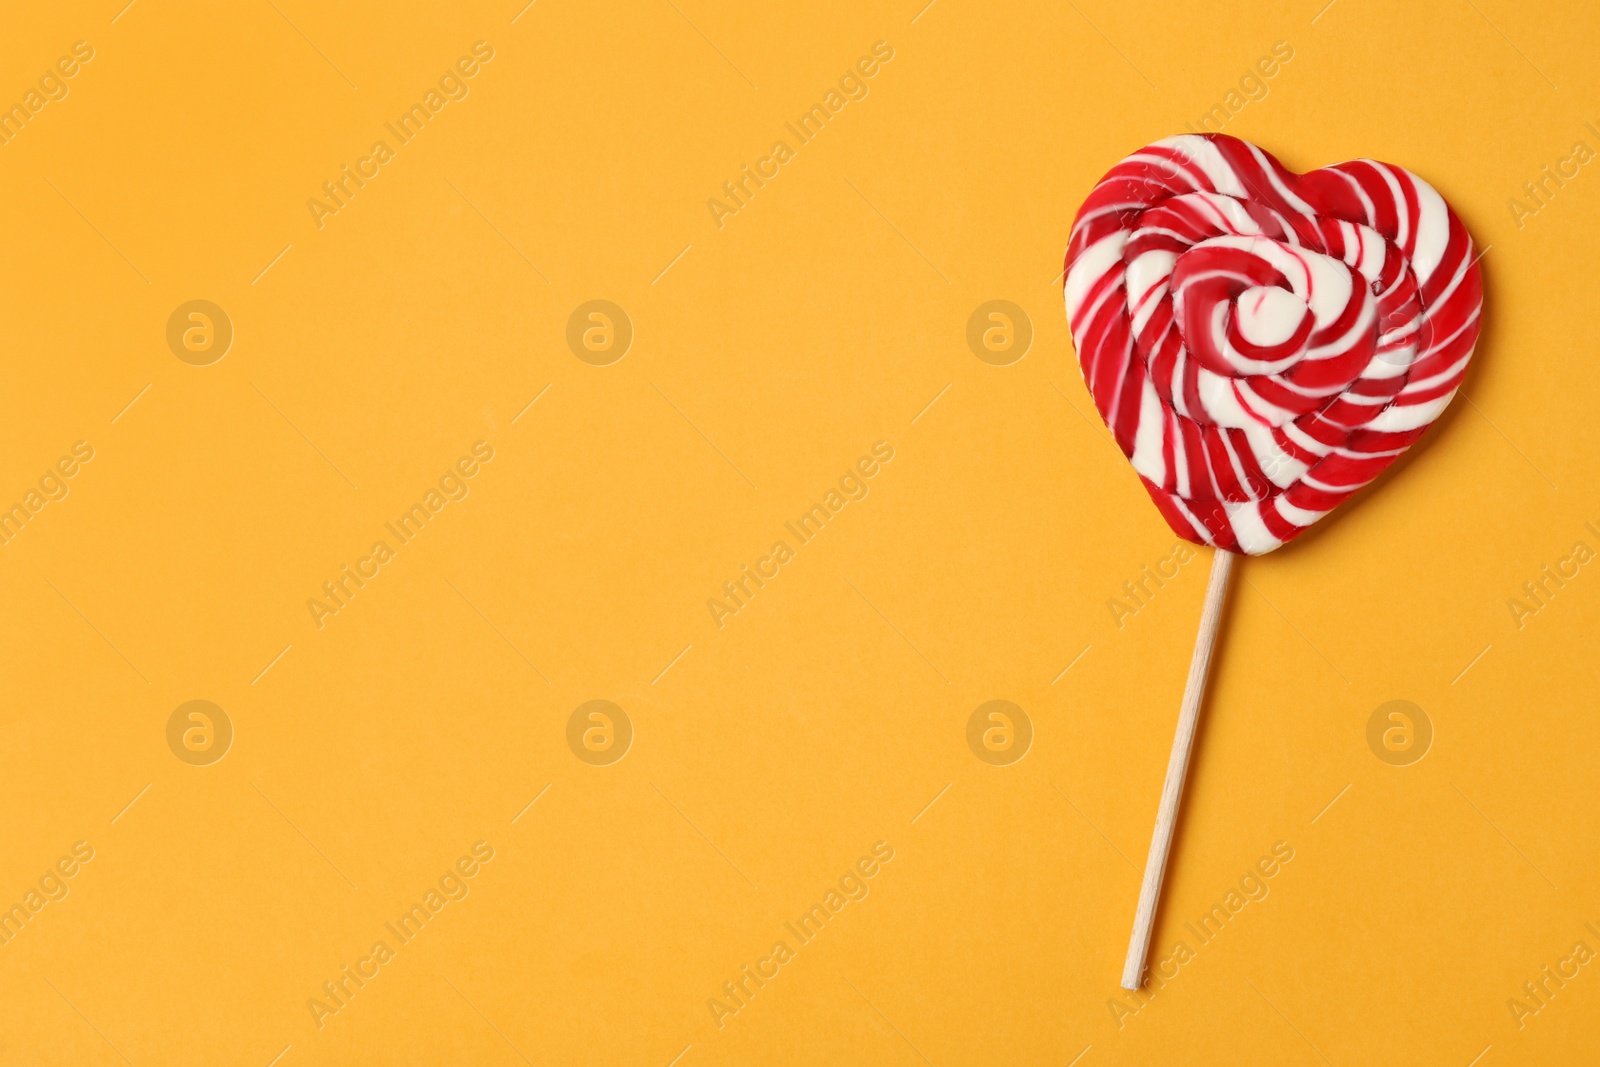 Photo of Sweet heart shaped lollipop on orange background, top view with space for text. Valentine's day celebration